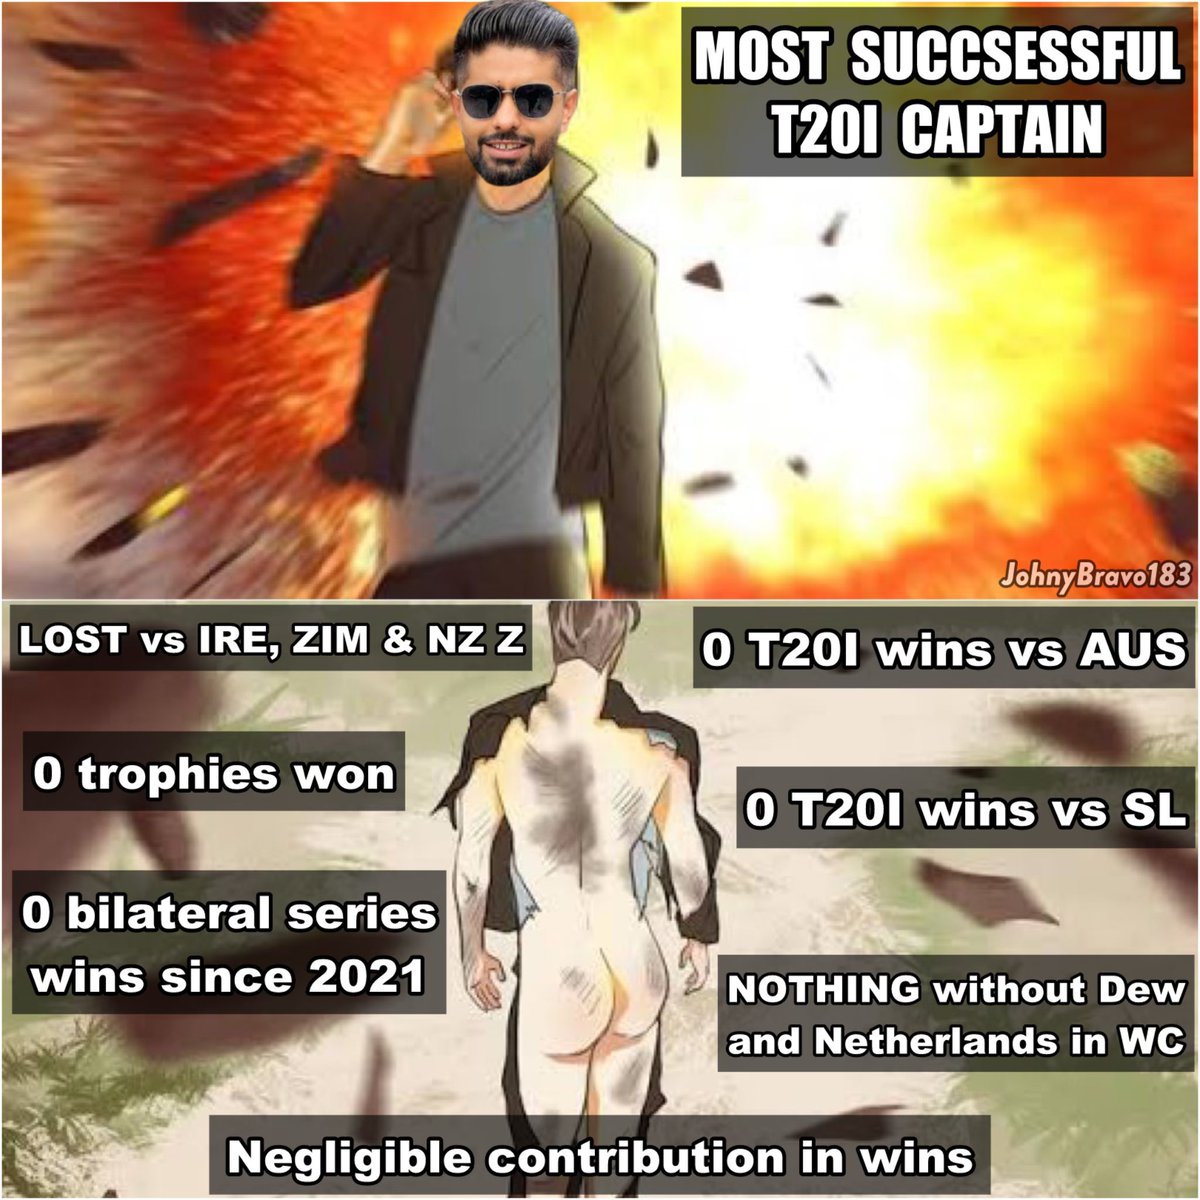 Congratulations Babar Azam for becoming the most successful T20I captain.